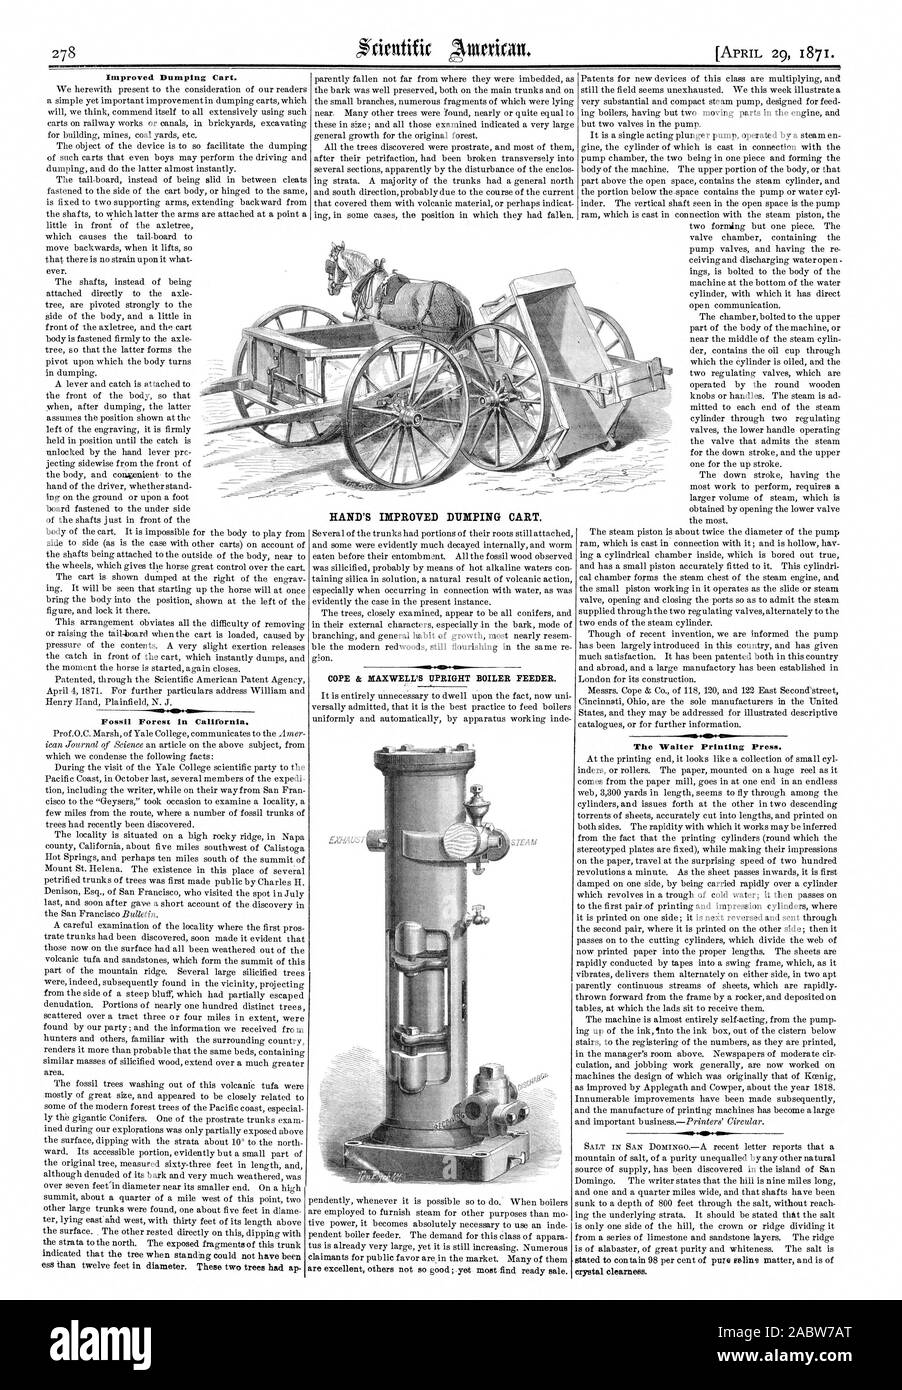 Fossil Forest in California. HAND'S IMPROVED DUMPING CART. COPE & MAXWELL'S UPRIGHT BOILER FEEDER. The Walter Printing Press., scientific american, 1871-04-29 Stock Photo